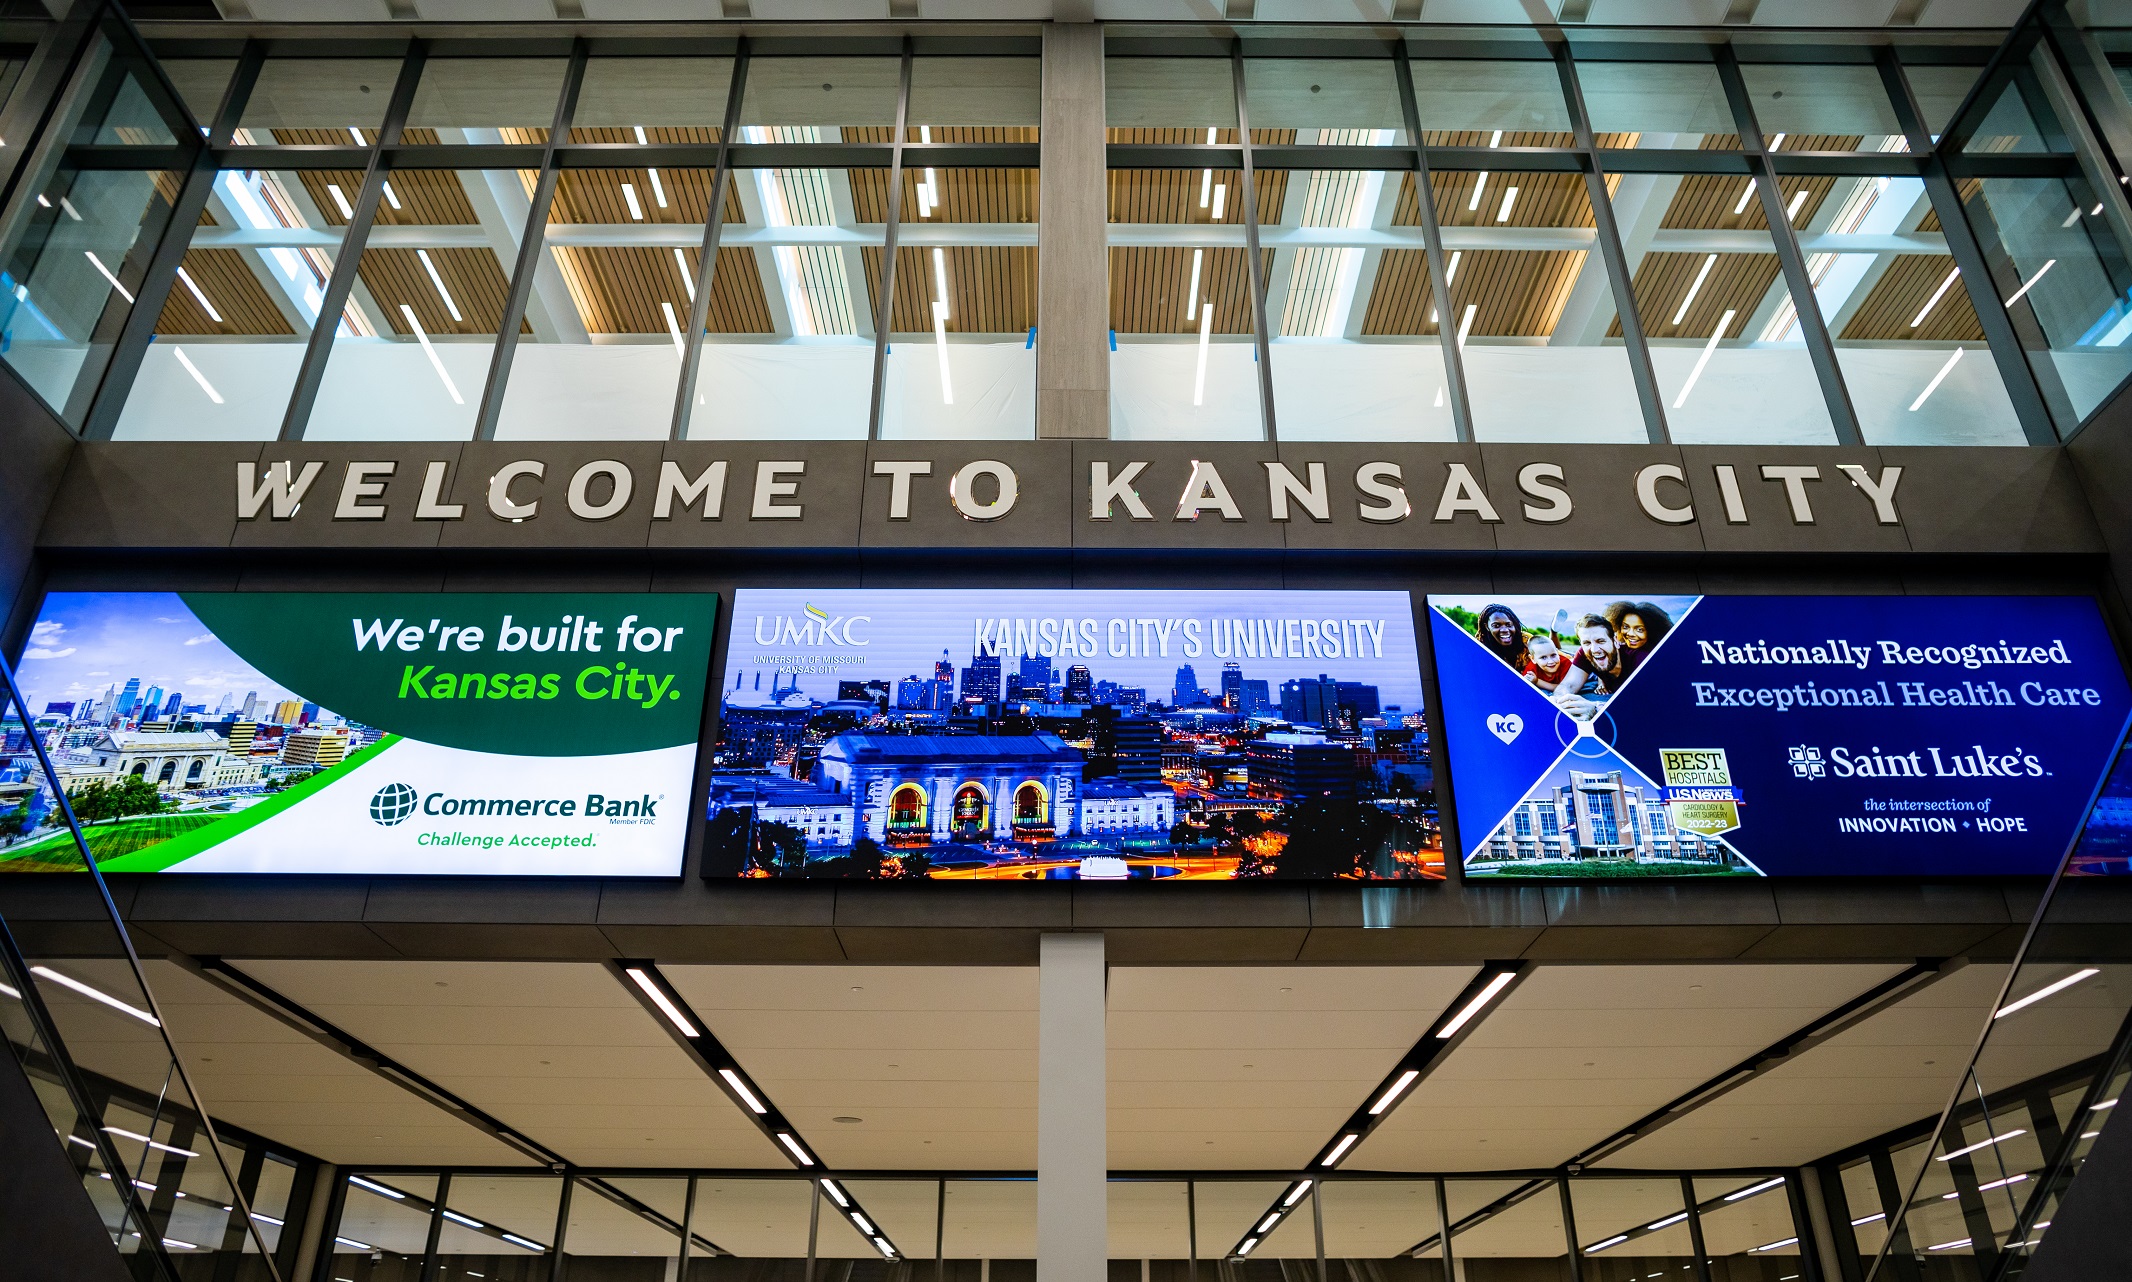 A sign over escalators down to baggage claim reads "Welcome to Kansas City." Below it are three large video boards for advertising. The middle board reads, "UMKC, Kansas City's University."